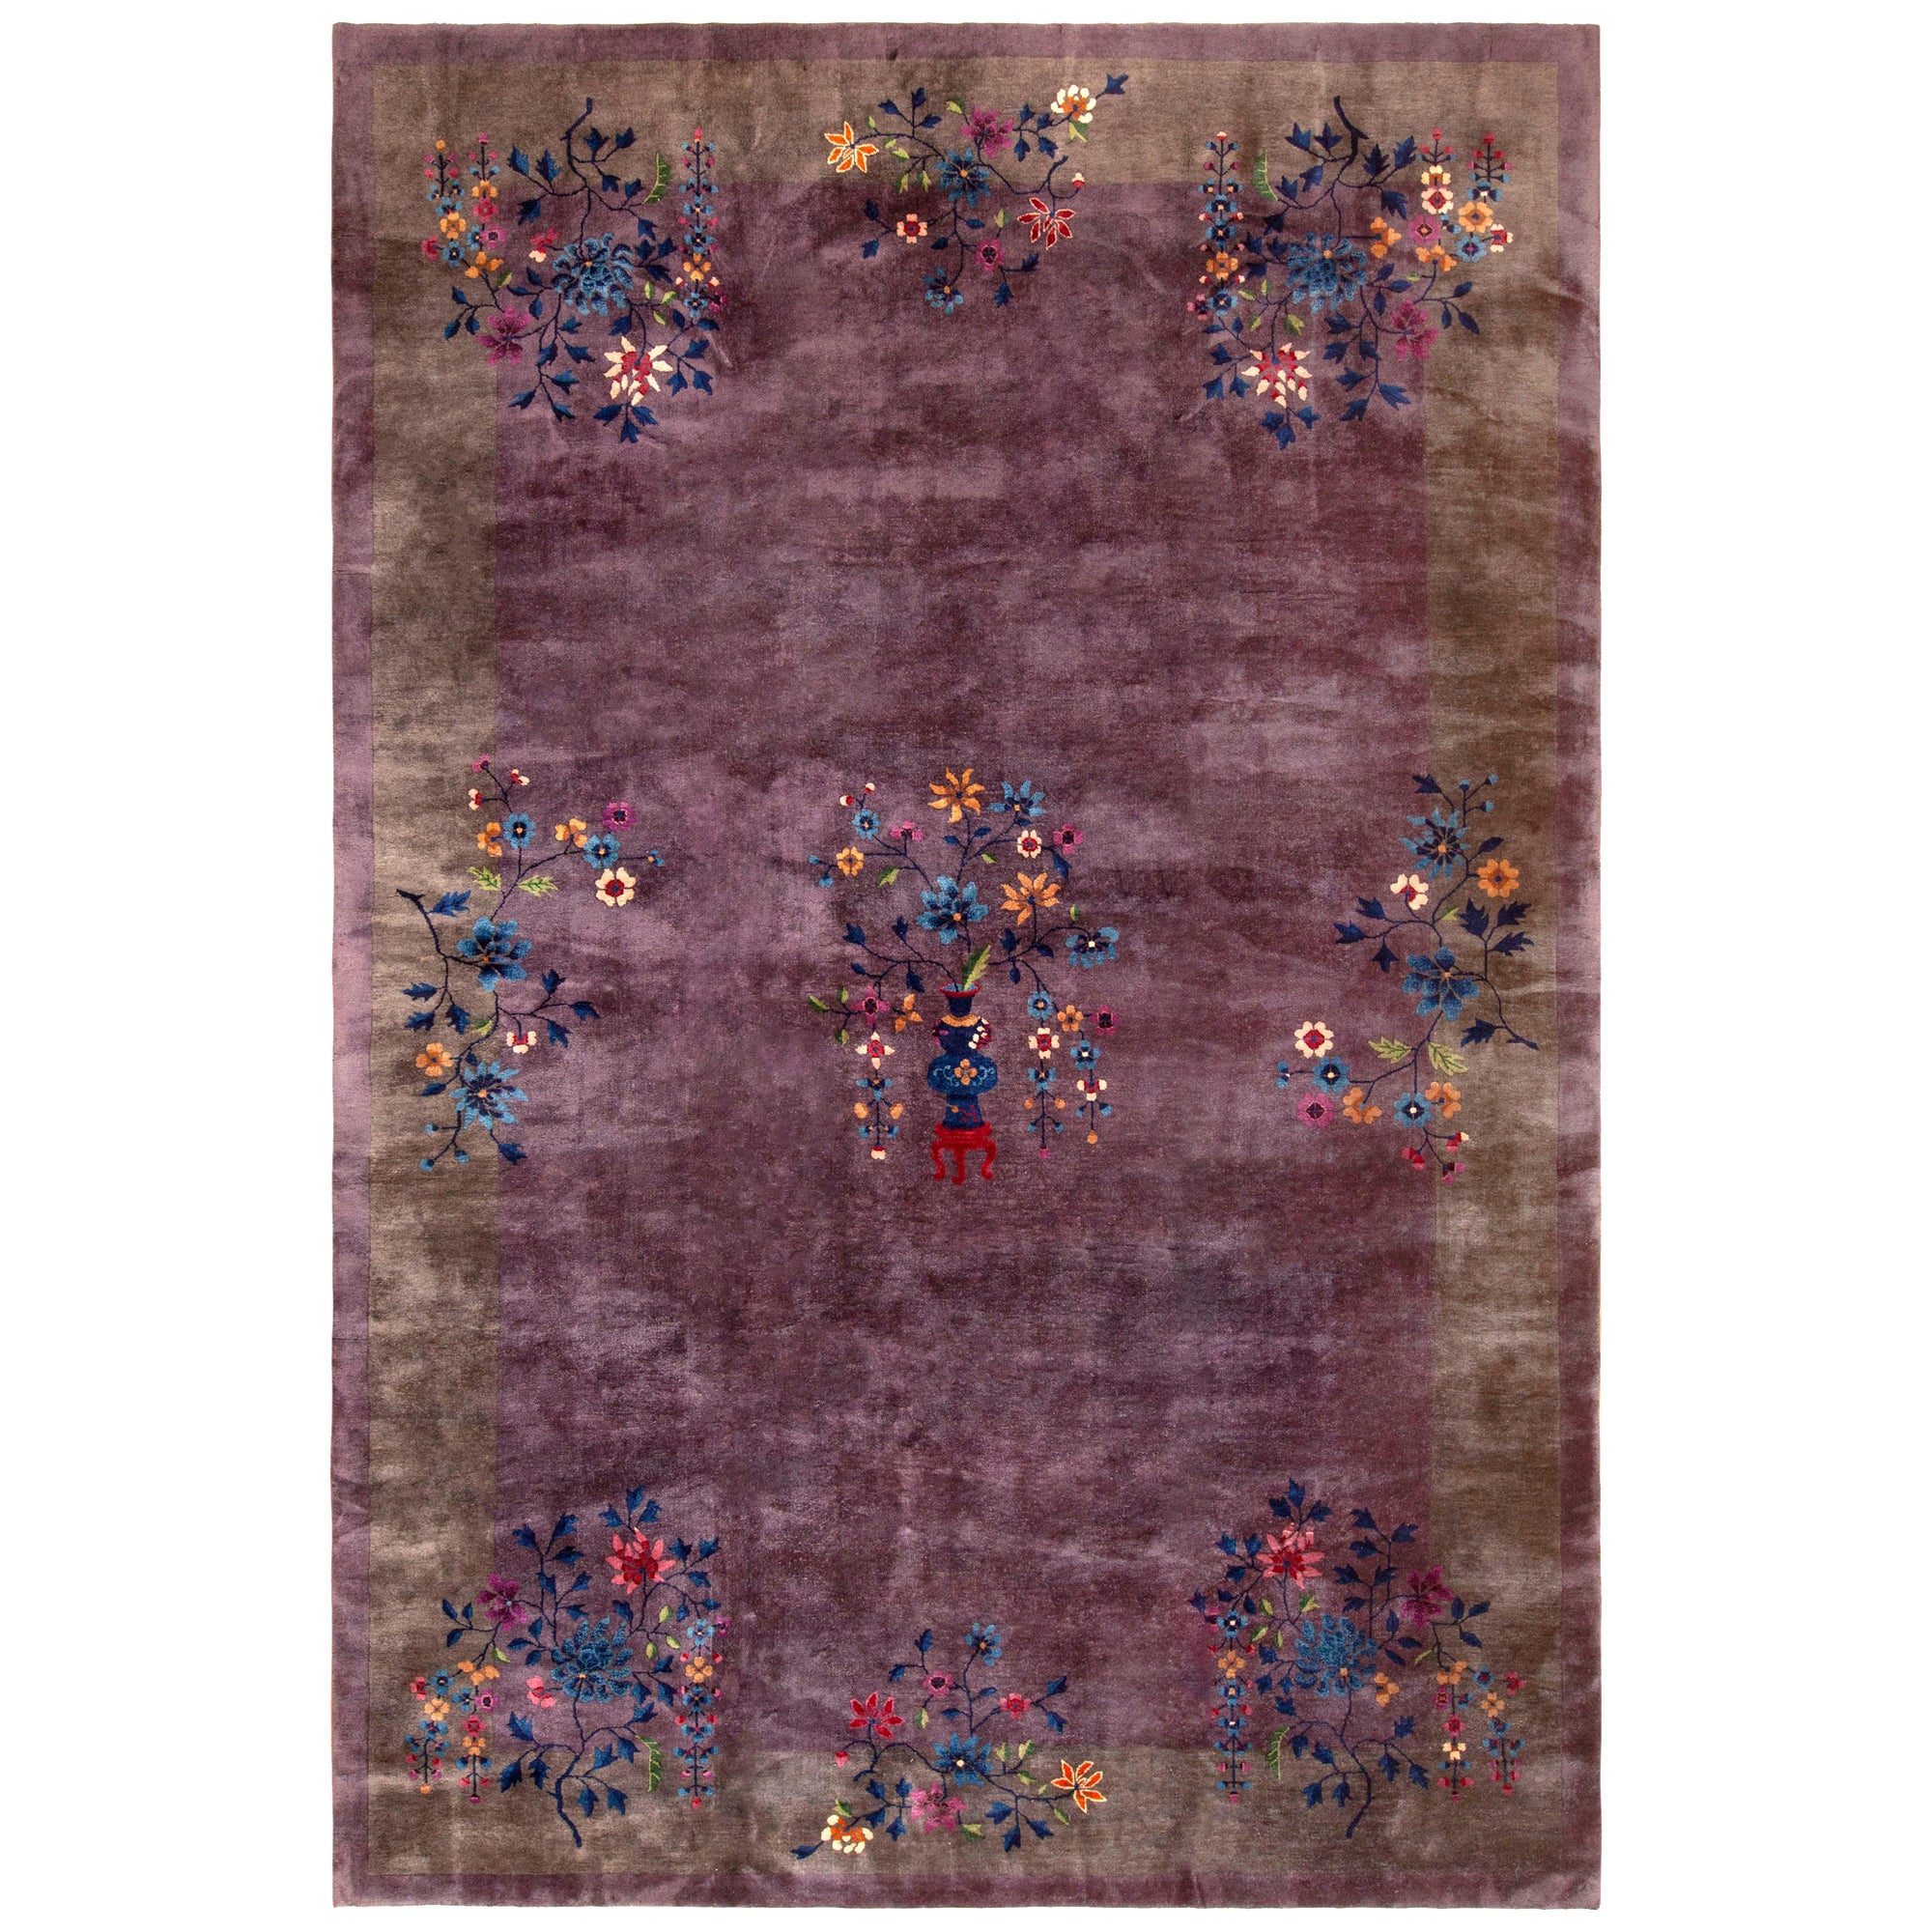 Artful Antique Chinese Art Deco Purple Background Area Rug 10' x 14'8"  For Sale